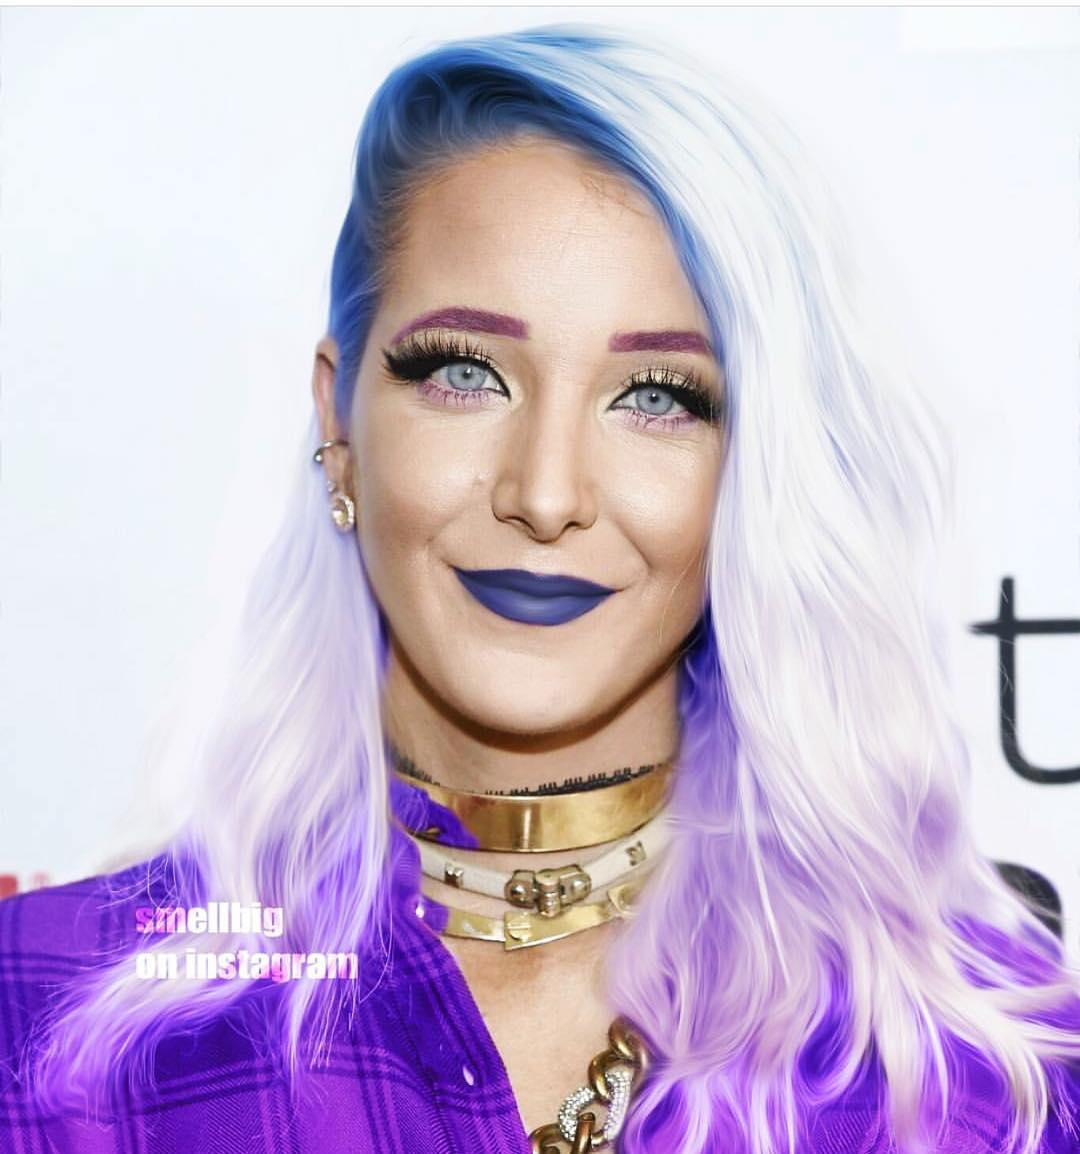 70+ Hot Pictures Of Jenna Marbles Prove She Is The Hottest Youtuber 59